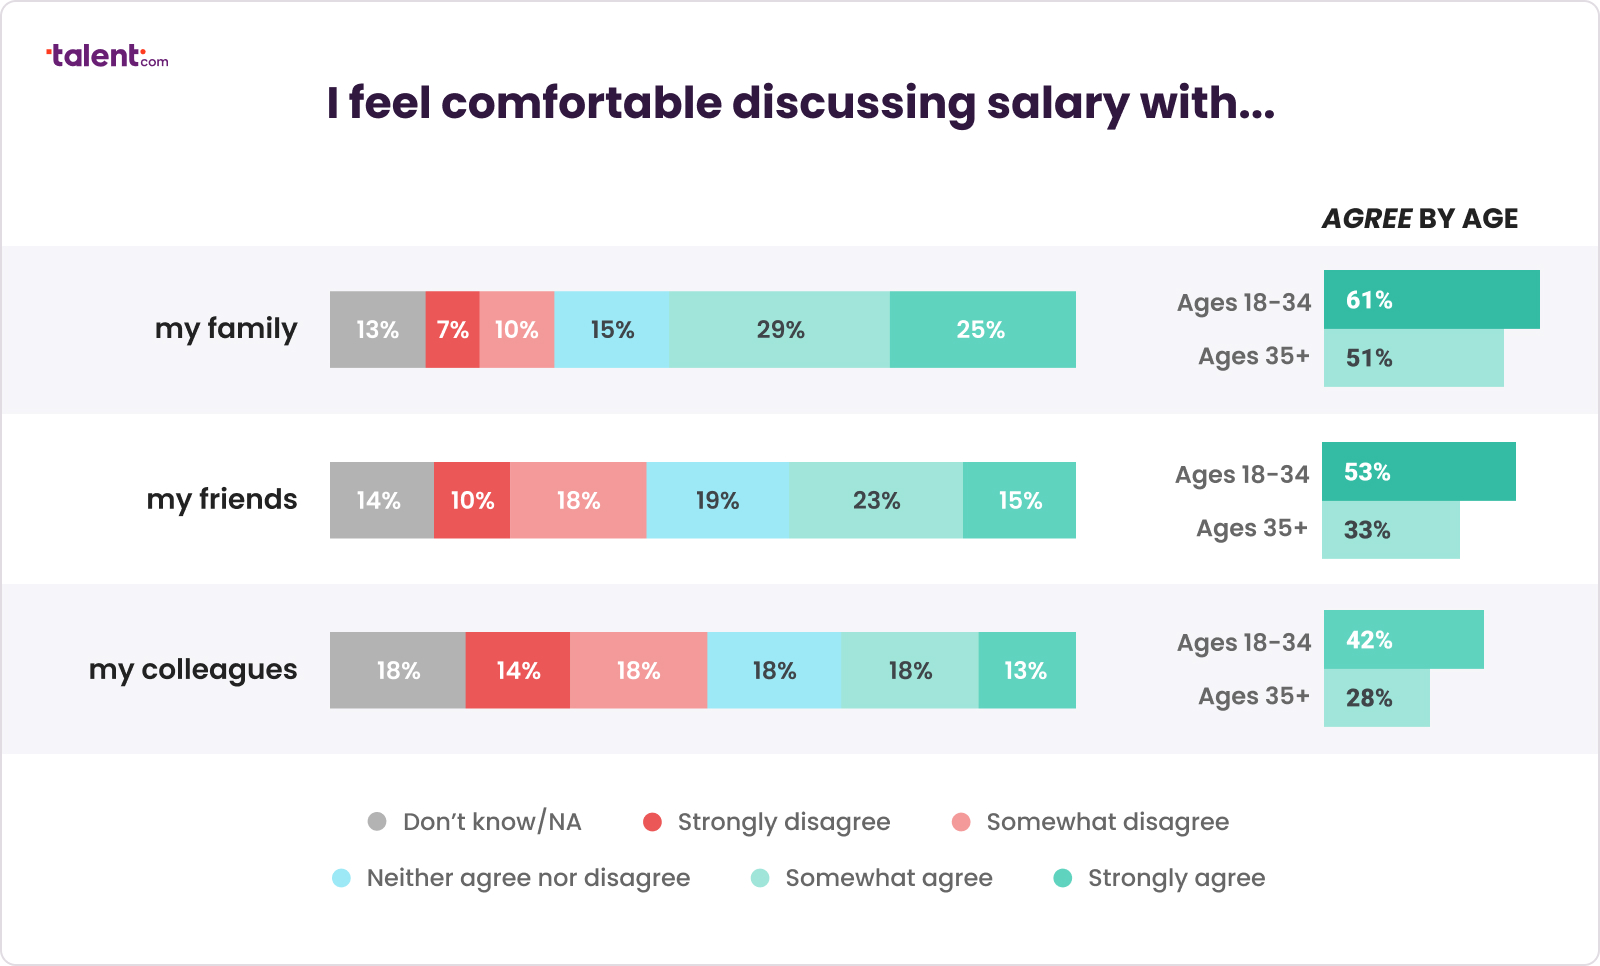 Share of Canadians who feel comfortable discussing salary